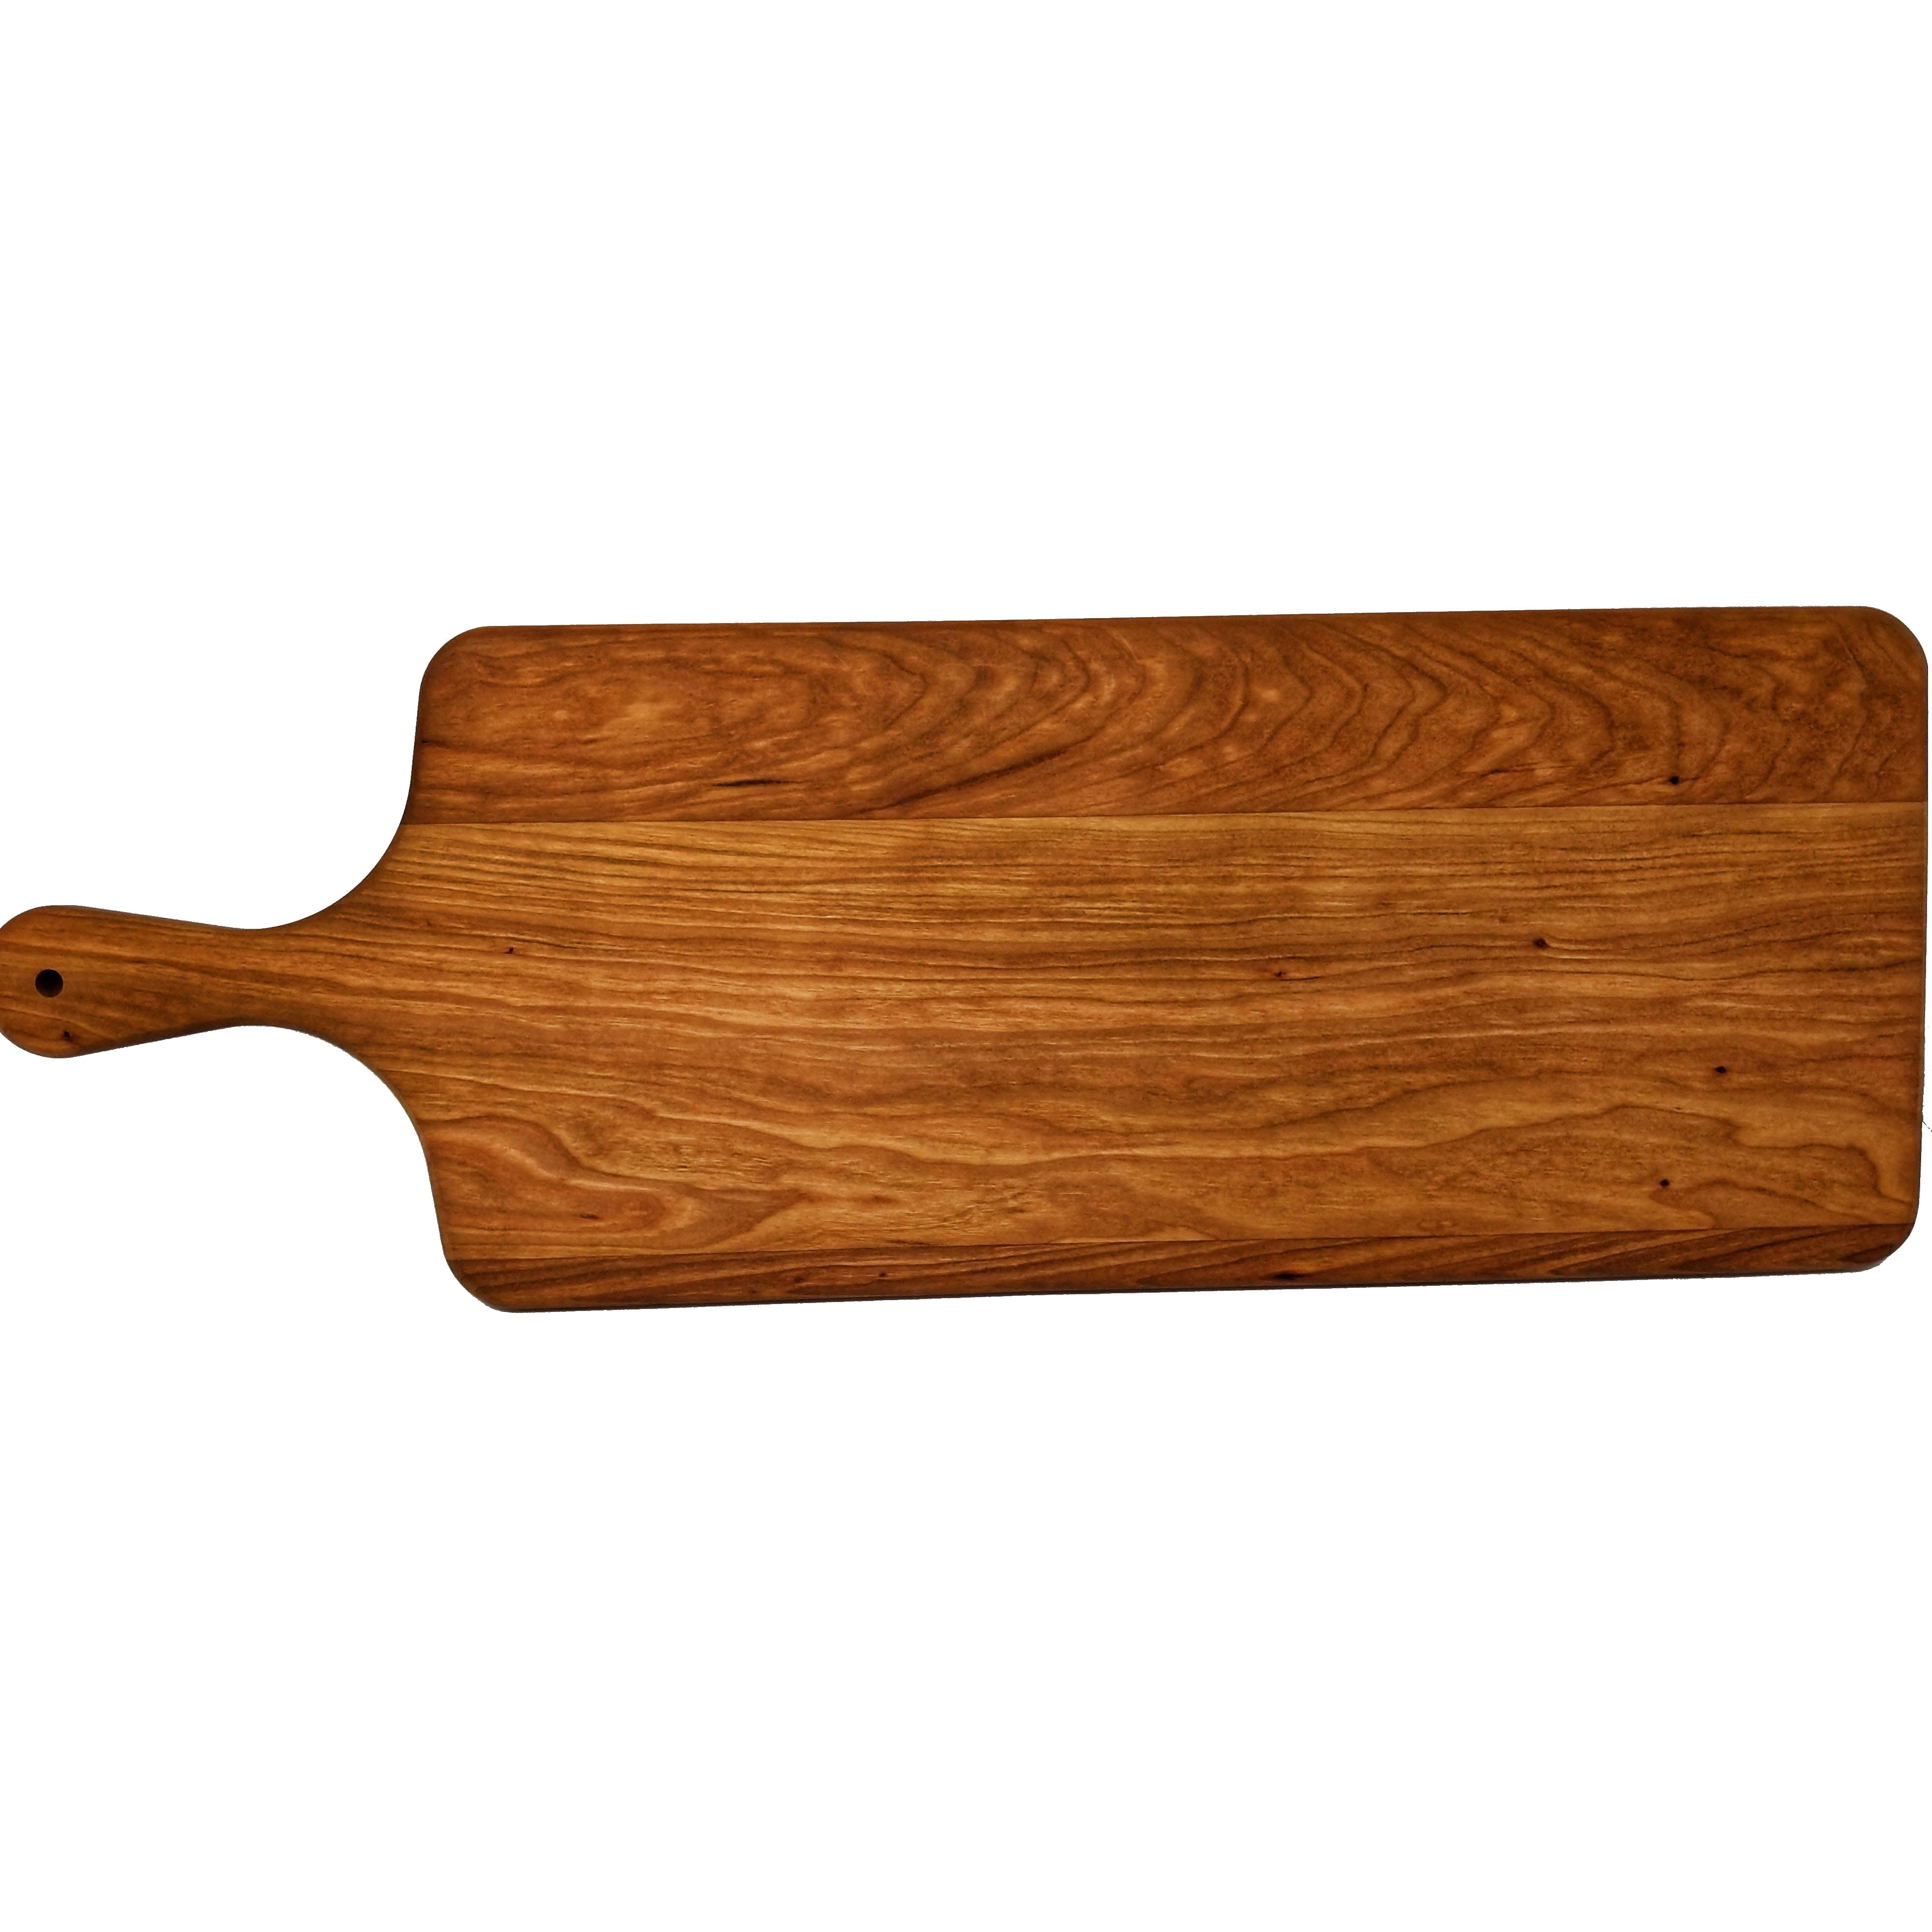 Cherry Wood Long Paddle Charcuterie Board With Handle Eaglecreek Boards 